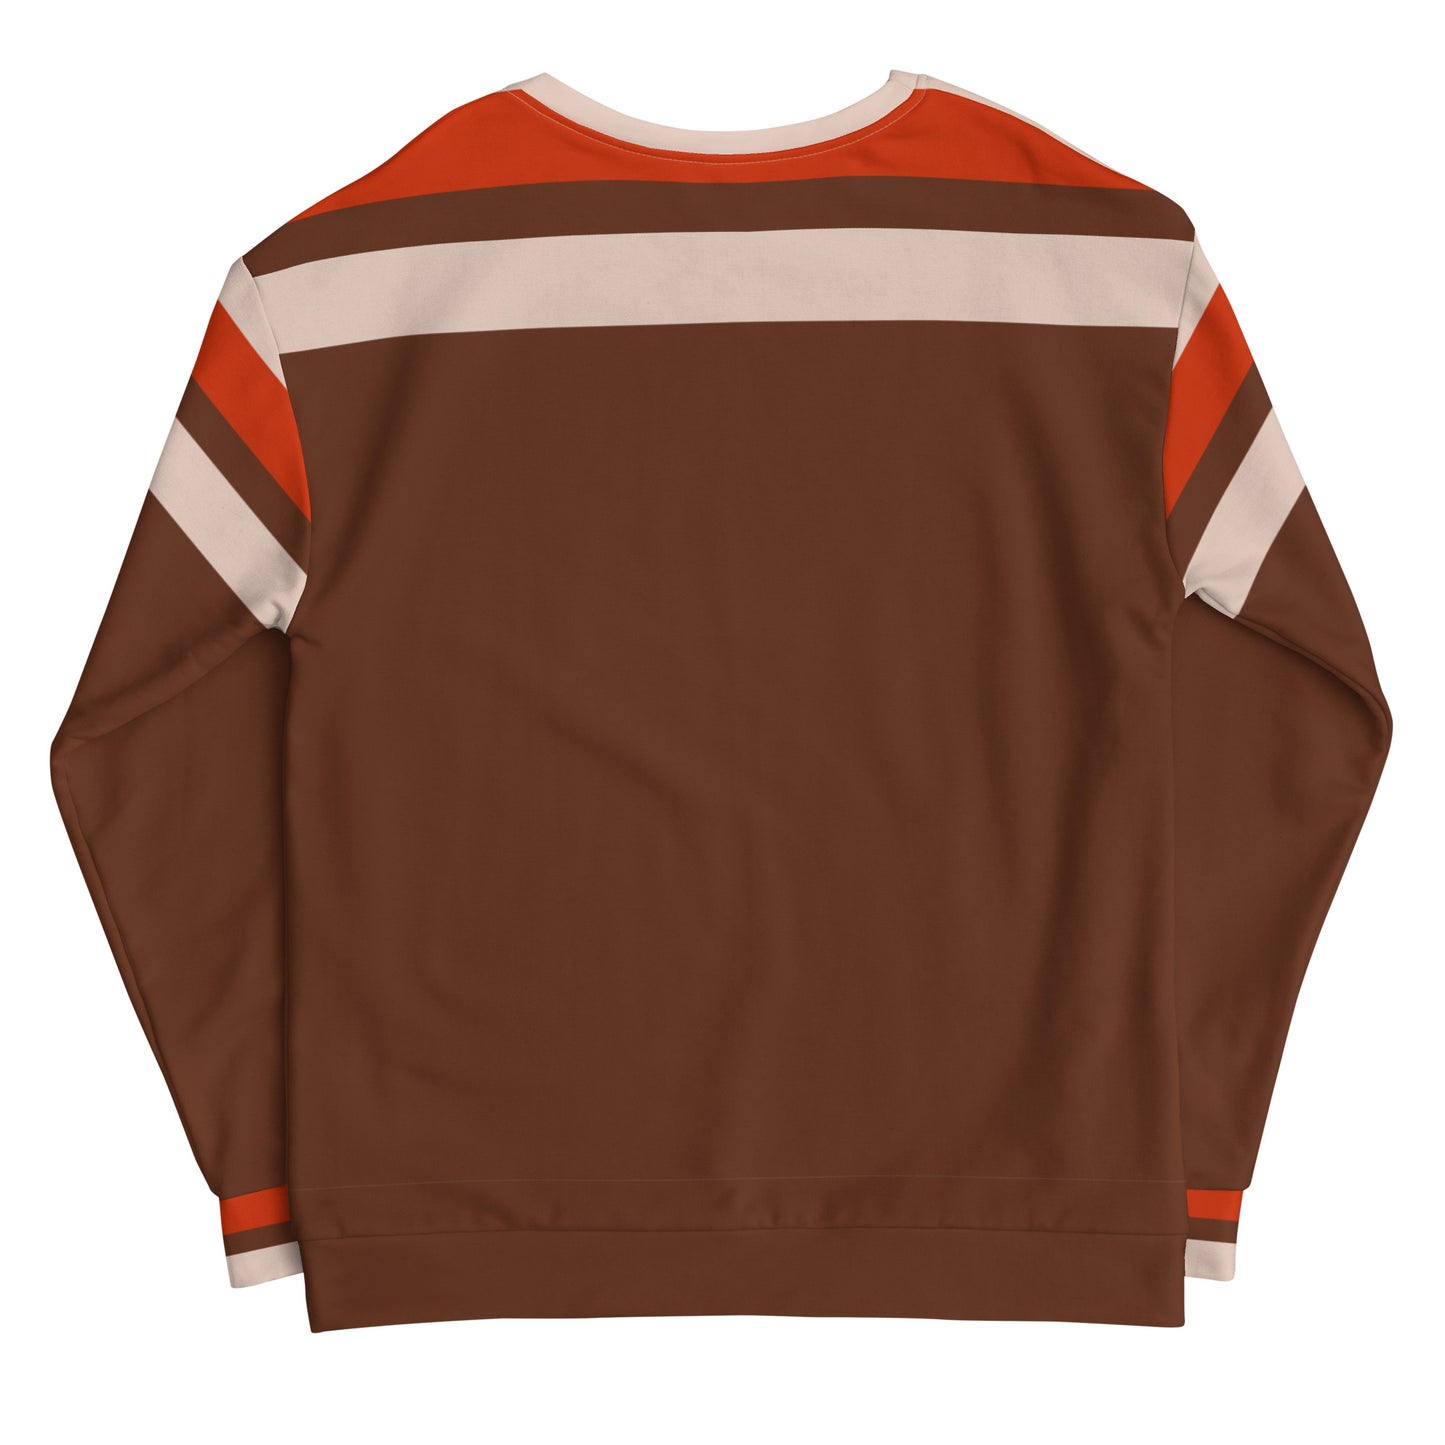 Retro Ambiance - Inspired By Taylor Swift - Sustainably Made Sweatshirt